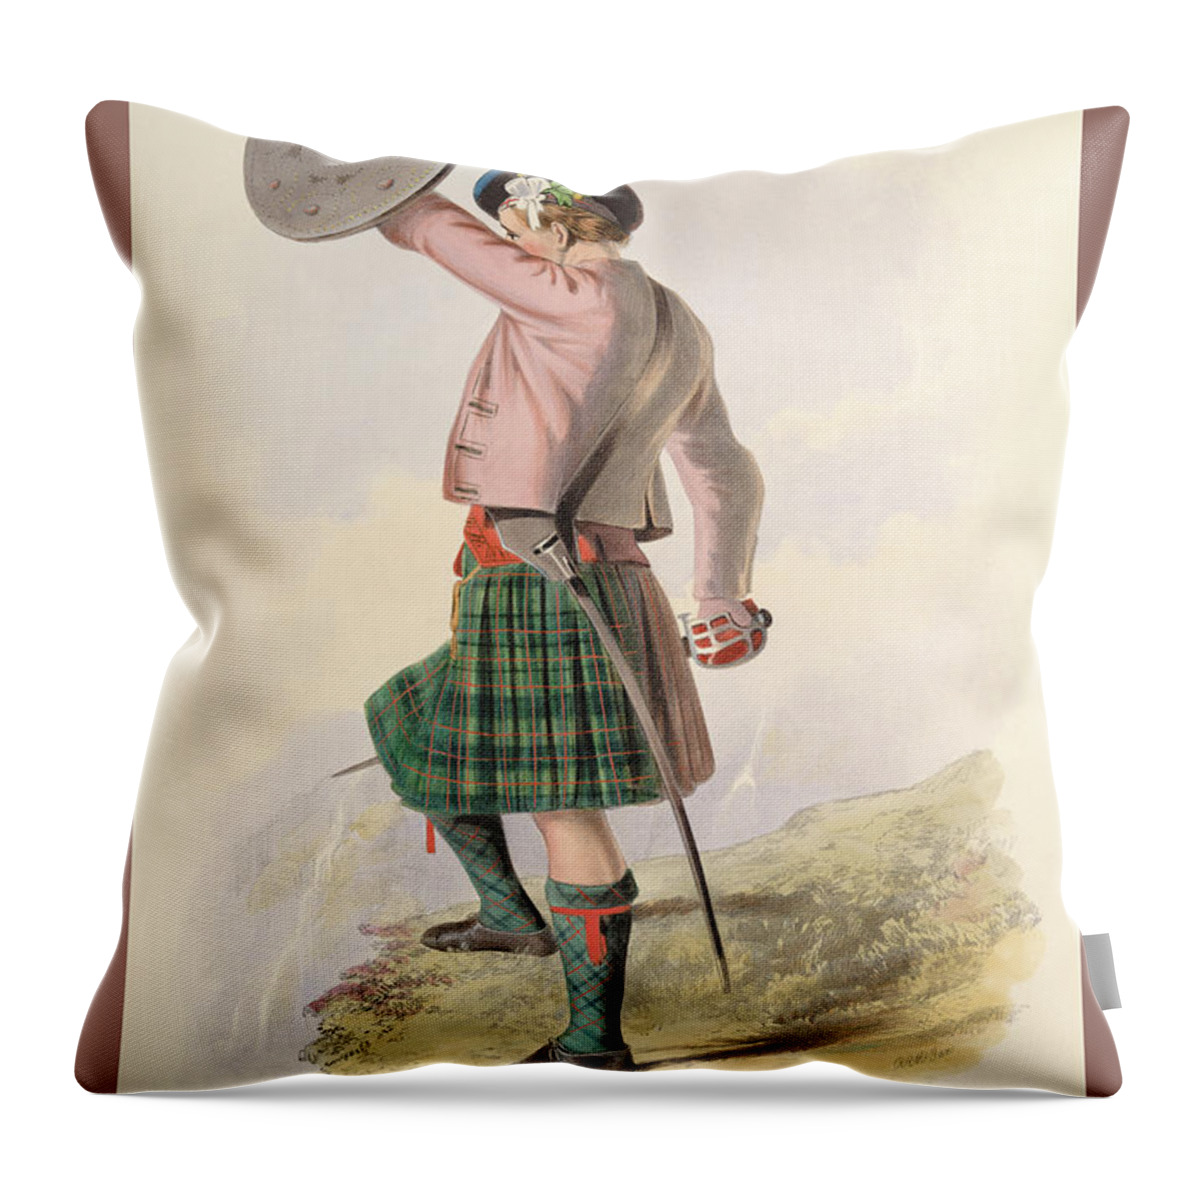 Scottish Throw Pillow featuring the painting Murray by R.R. McIan